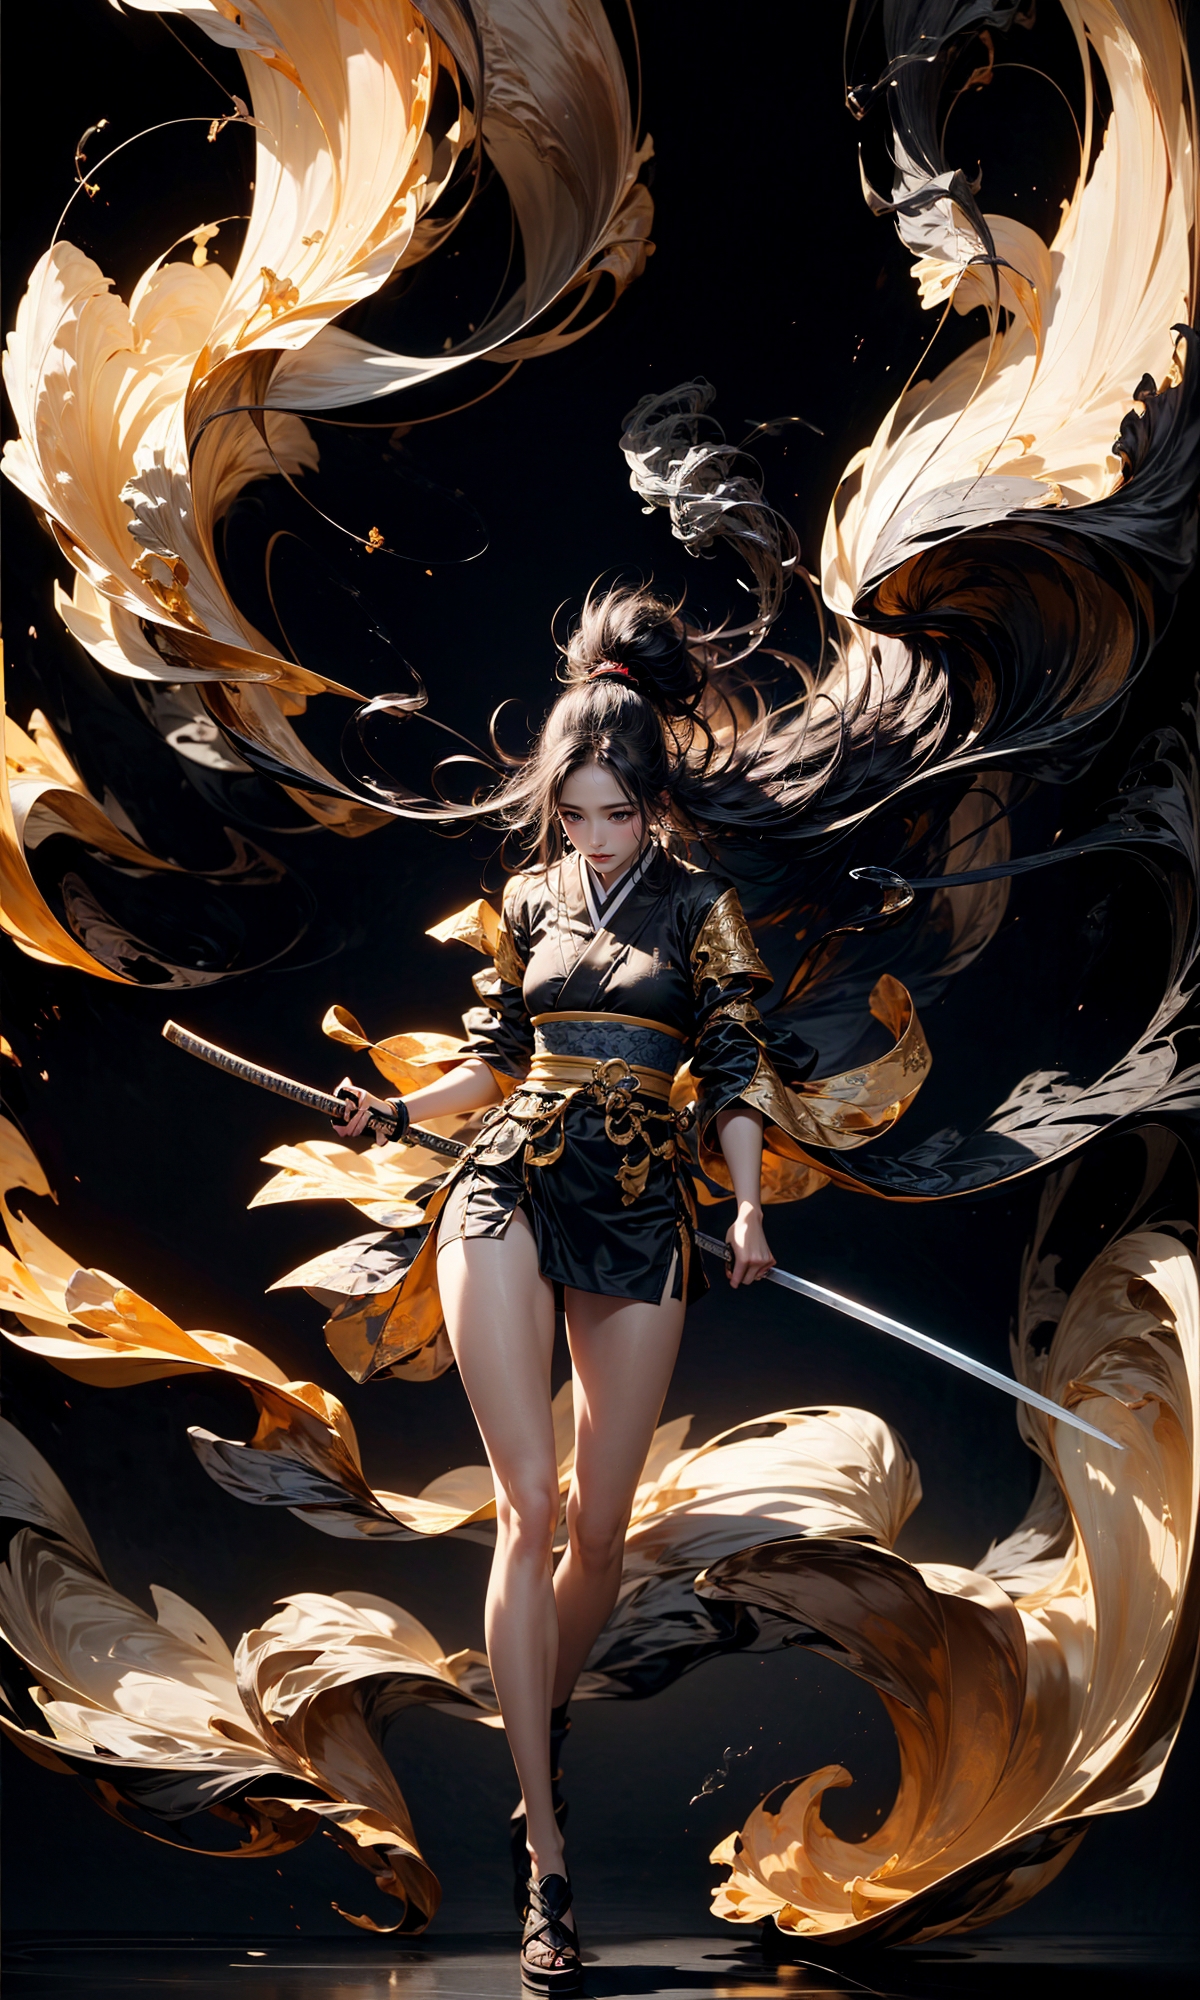 A woman in a black and gold kimono holding a sword.